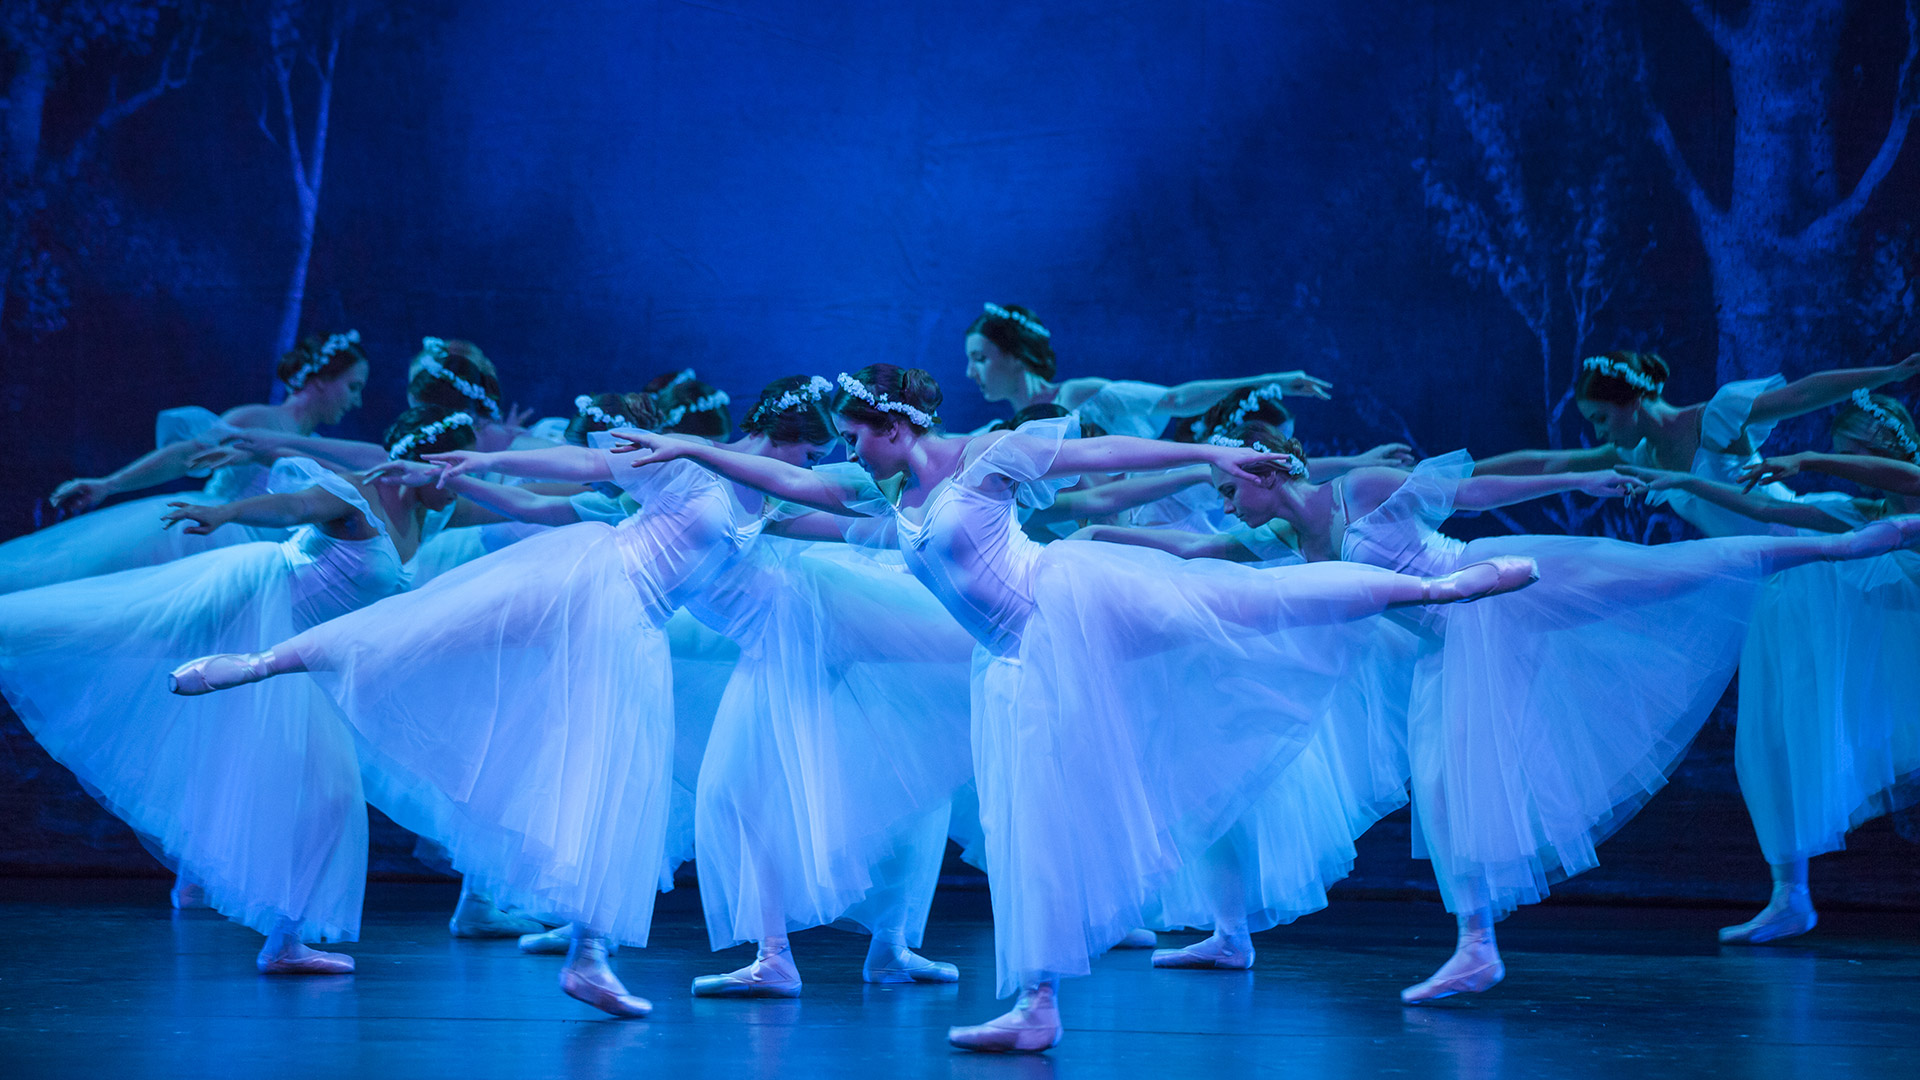 A scene from Swan Lake with lots of ballarina's in a formation.